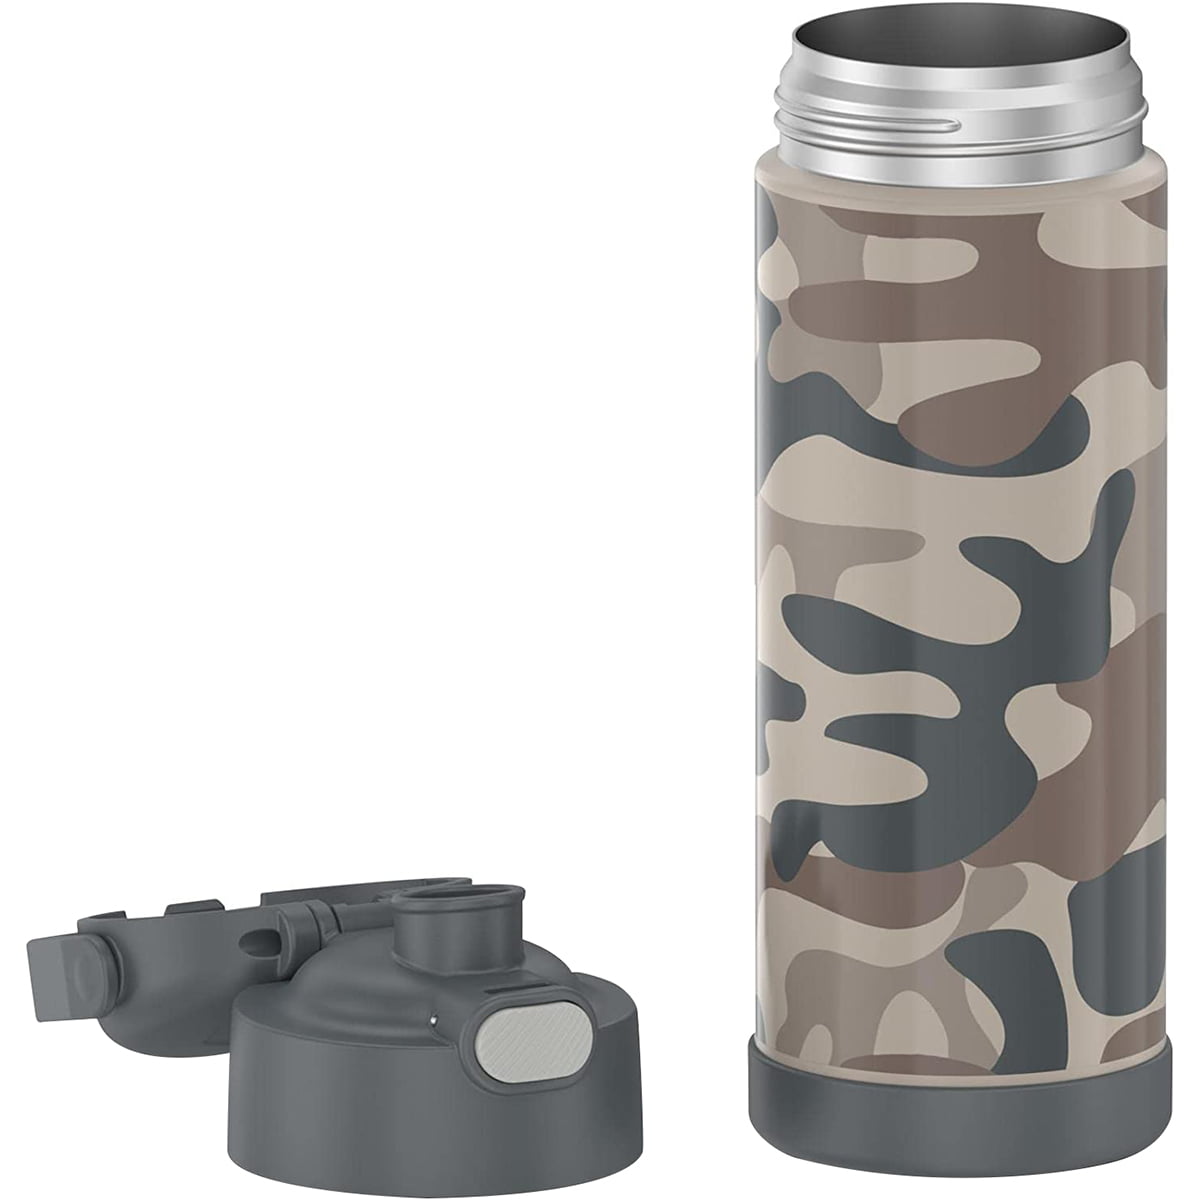 SARNFANS Camo Insulated Water Bottles,Fashionable Graphic Uniform  Design,18oz Water Bottle,Stainless Steel Metal Water Bottle, Reusable  Thermos